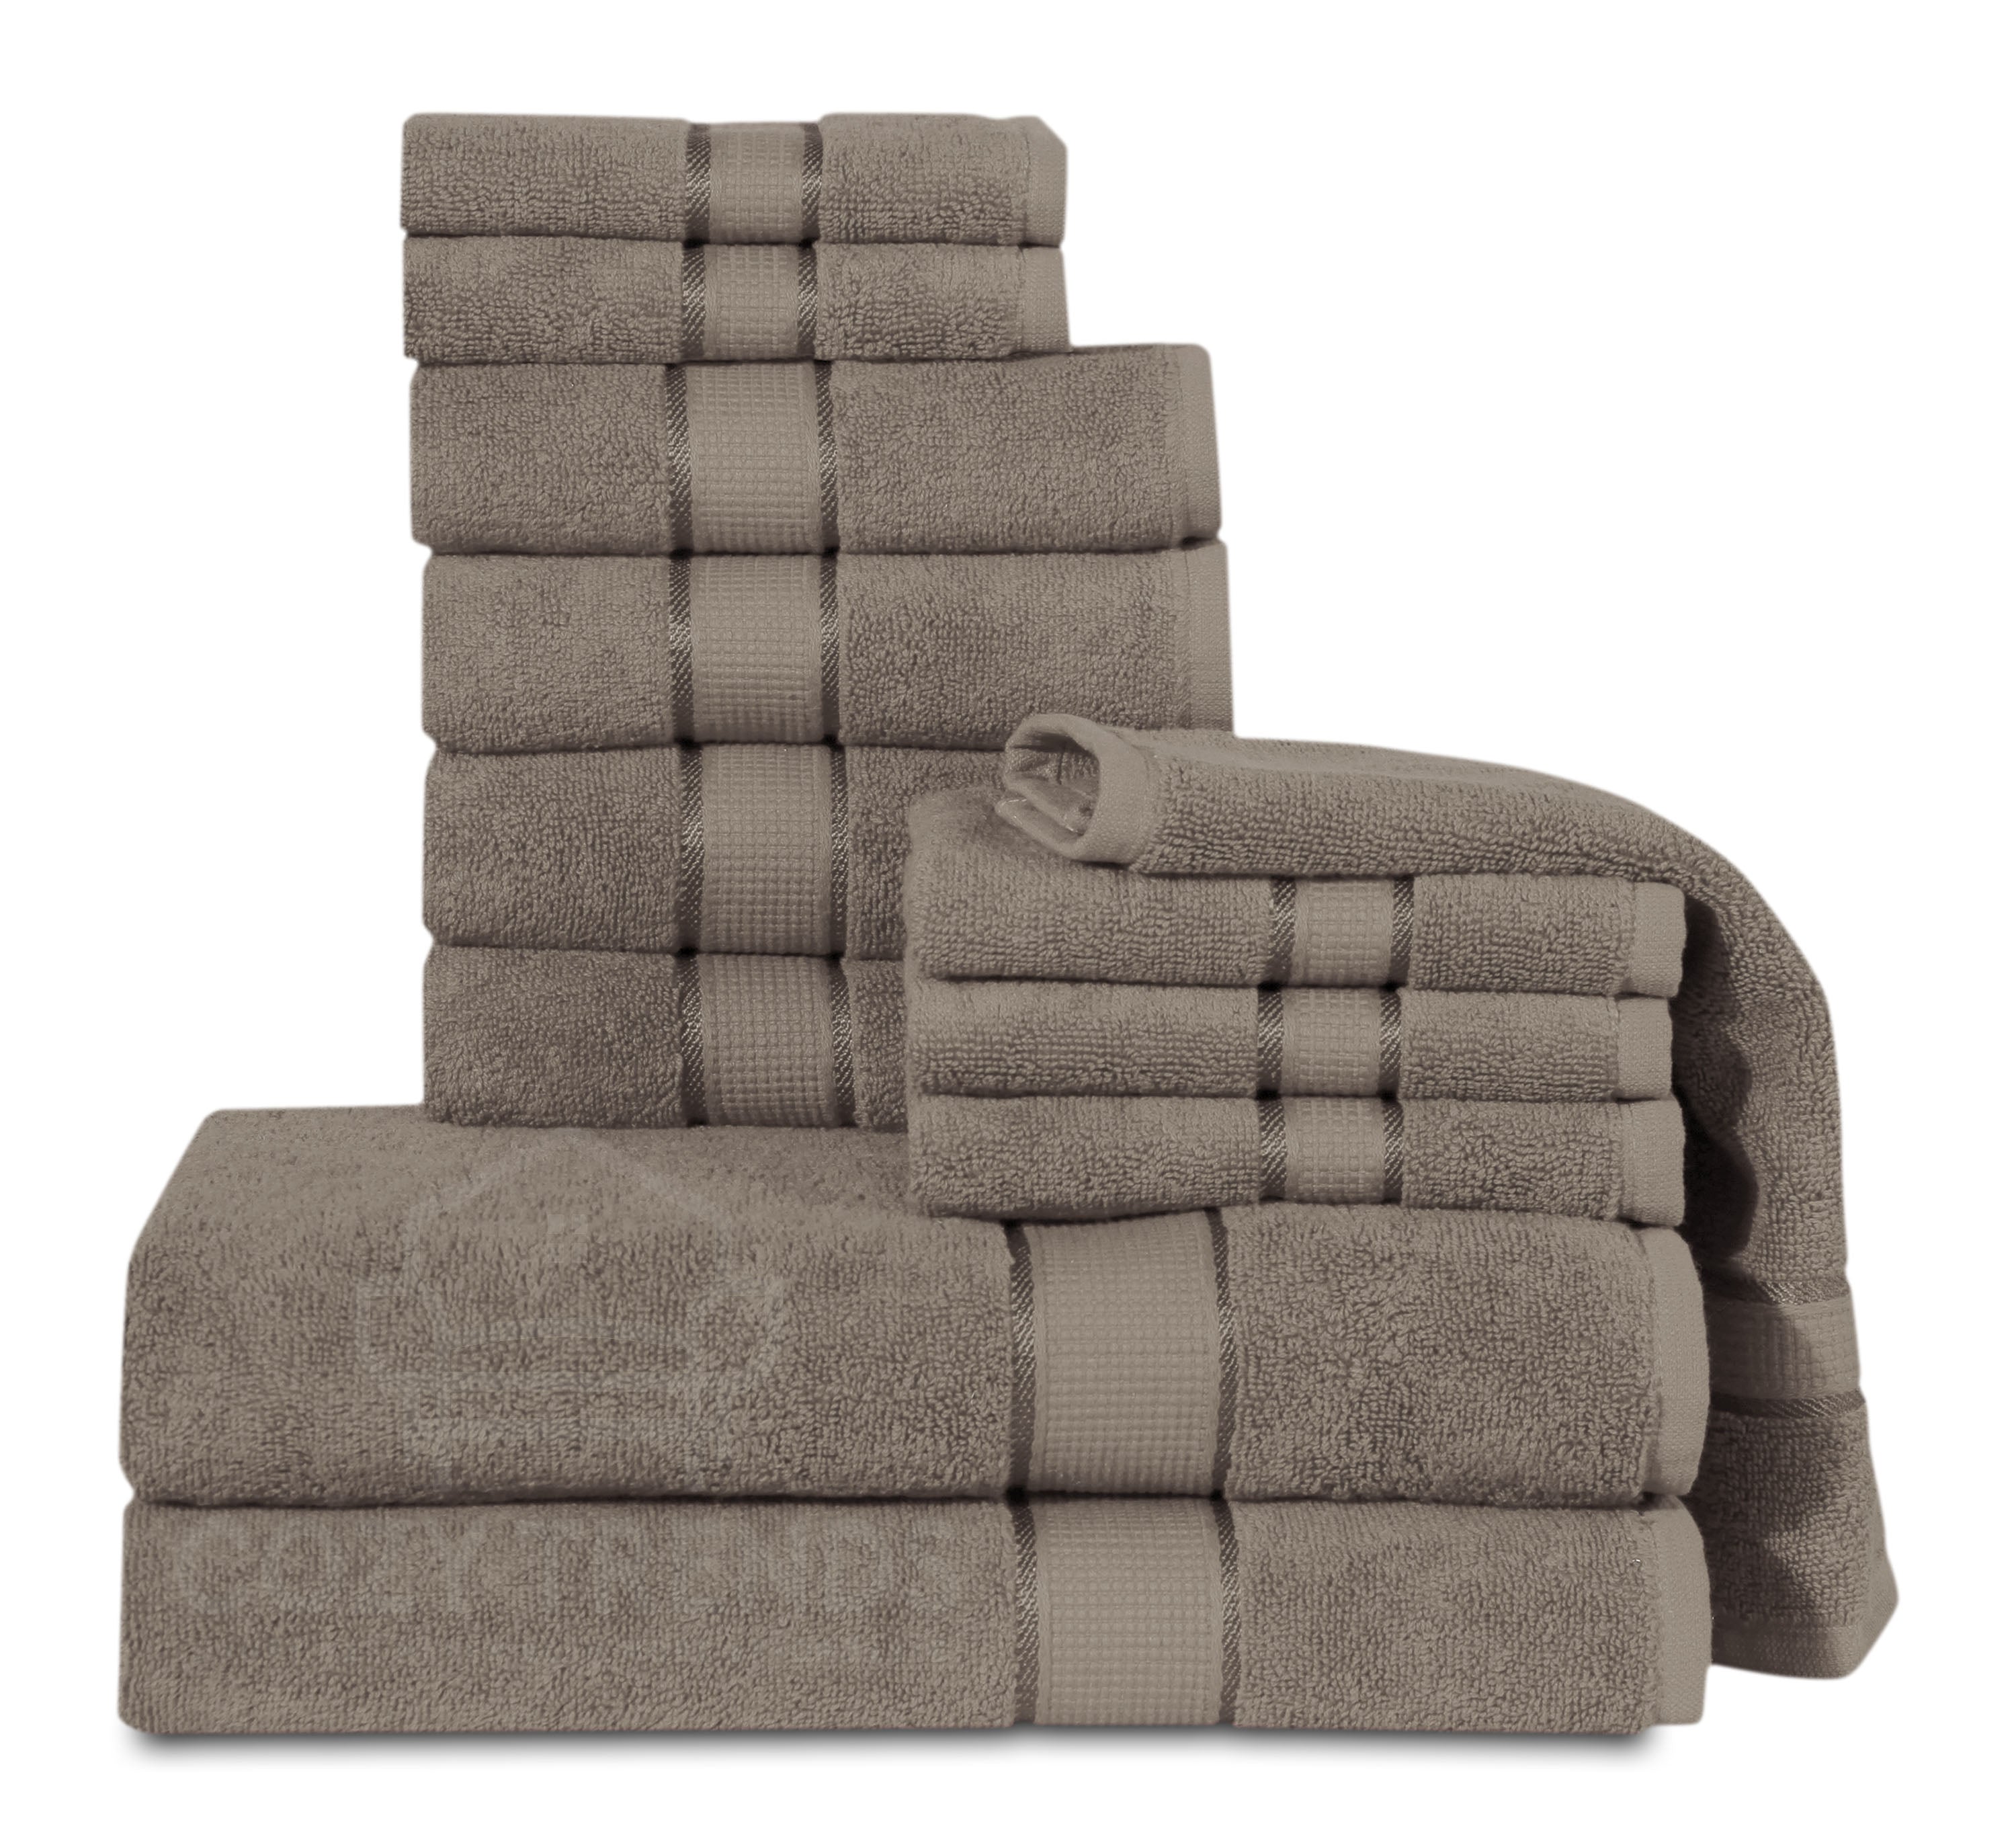 Pack of Towels Bath K25 Bath Towel Towels 3 Piece Towel Set 1 Bath Towels 2  Hand Towels 600 GSM Ring Spun Cotton Highly Absorbent Towels For Pretty  Towels Christmas Bathroom Hand